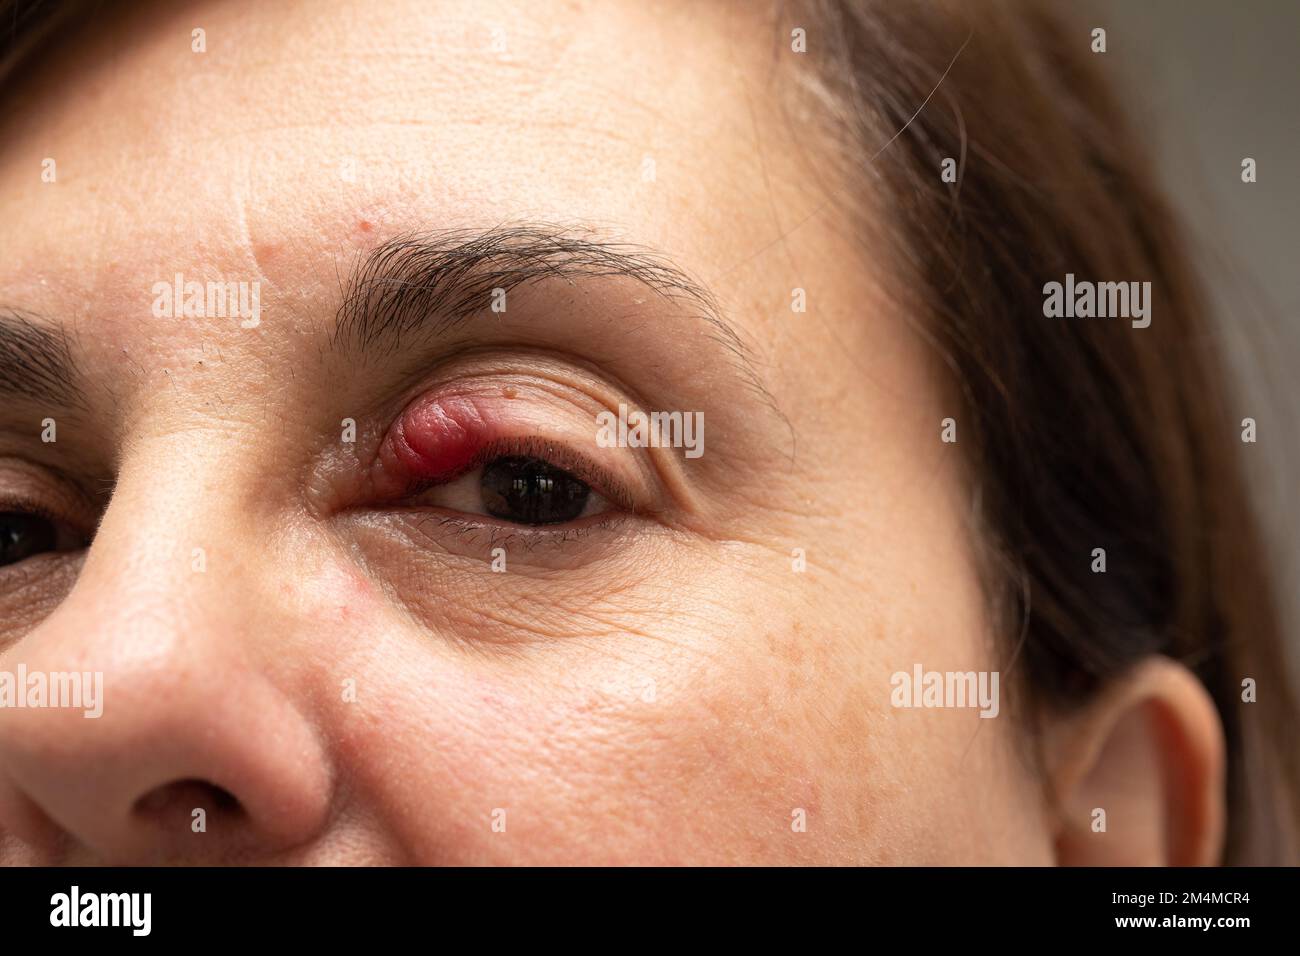 inflammation of the hair bulb on the eyelids, hordeolum, bacterial infection in the eyelid. High quality photo Stock Photo